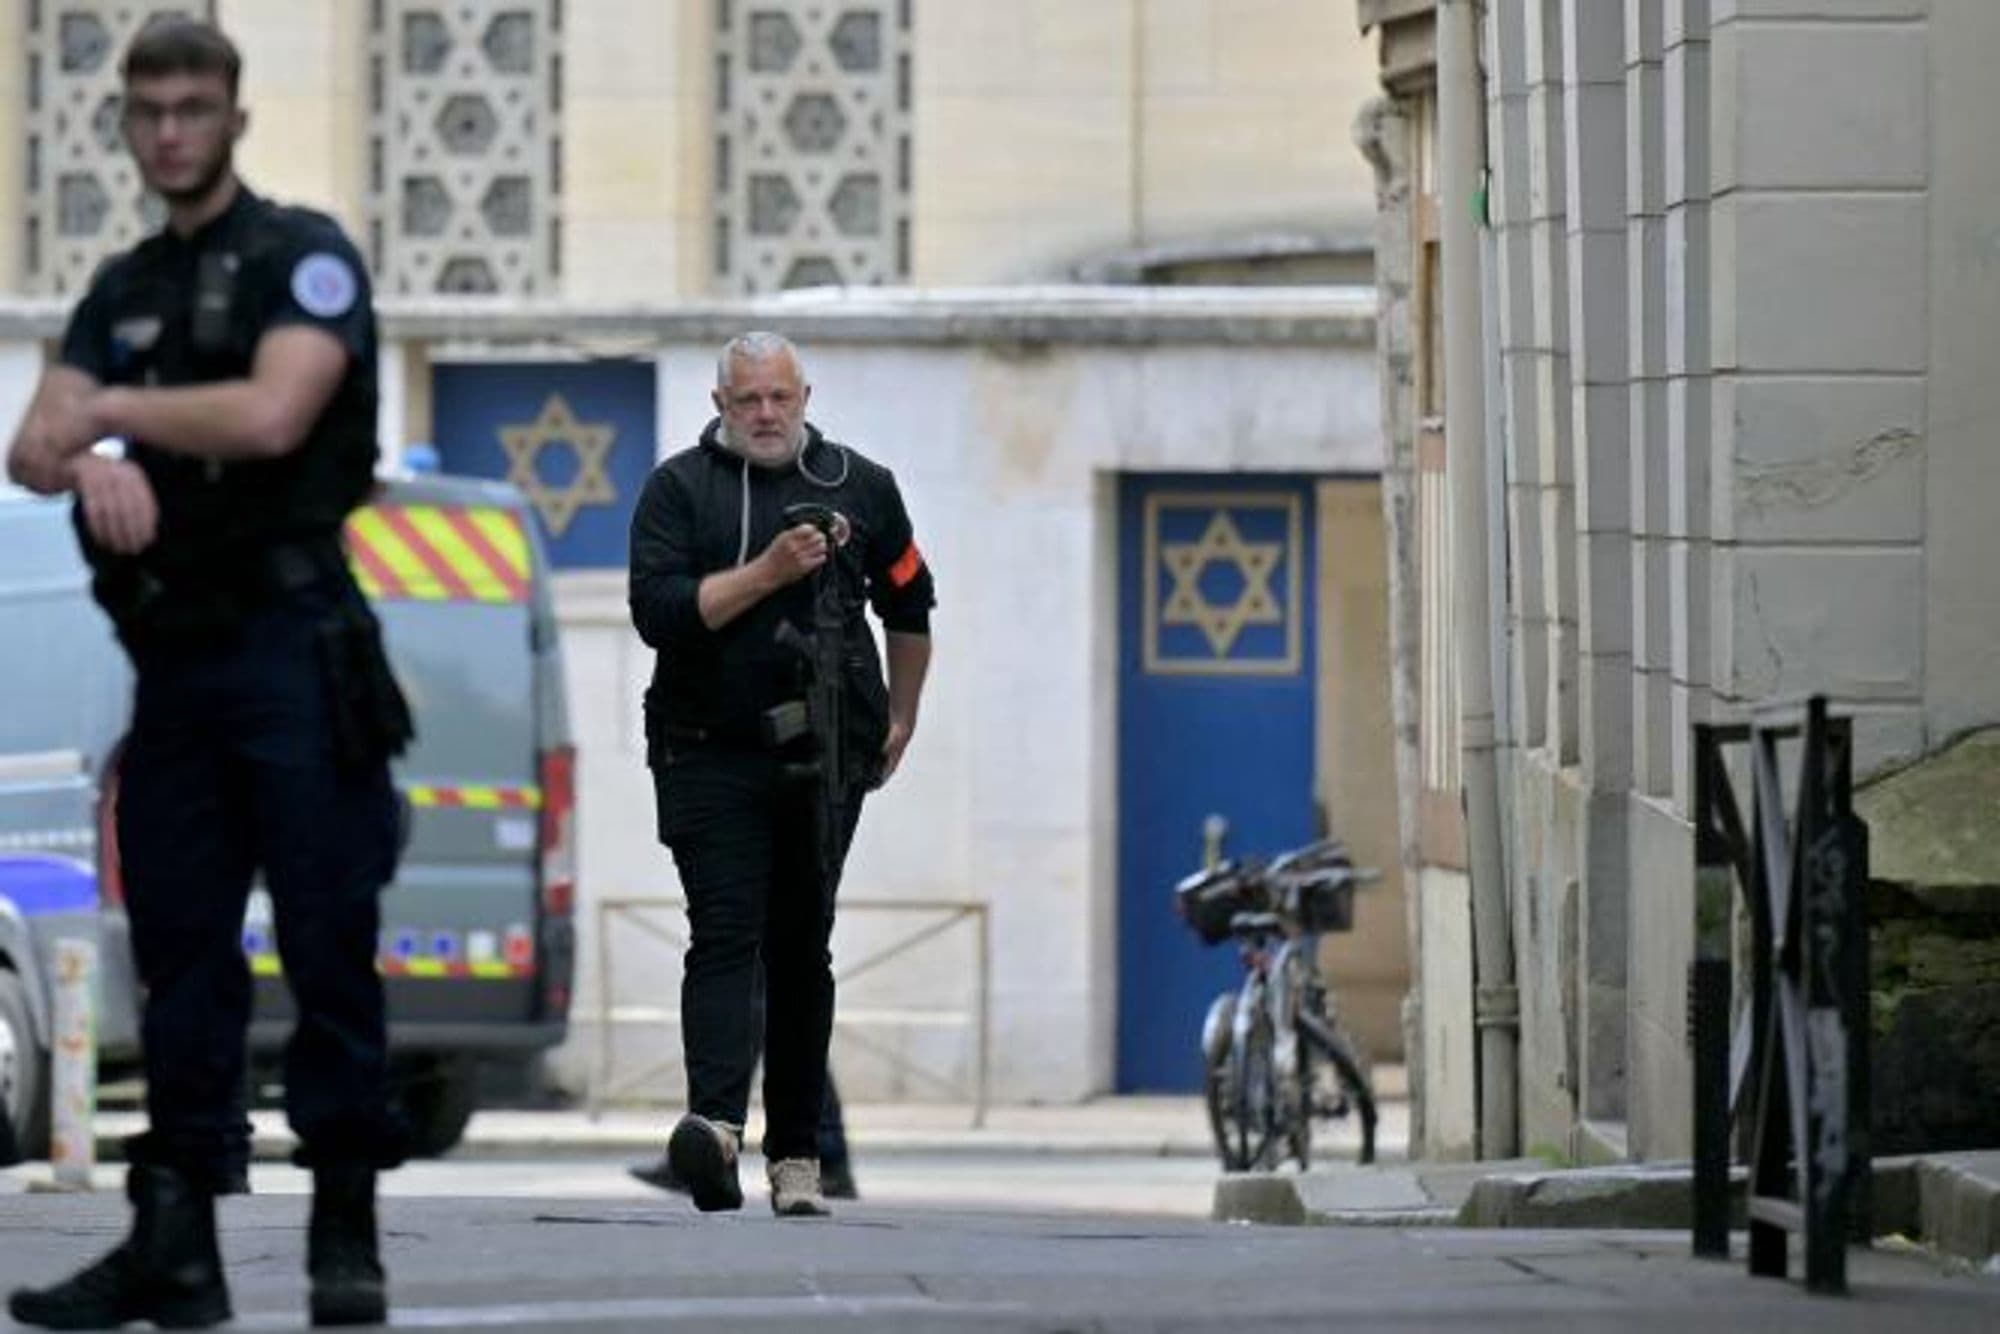 Man Shot by Police in Attempted Synagogue Arson Incident in Rouen: Investigations Underway